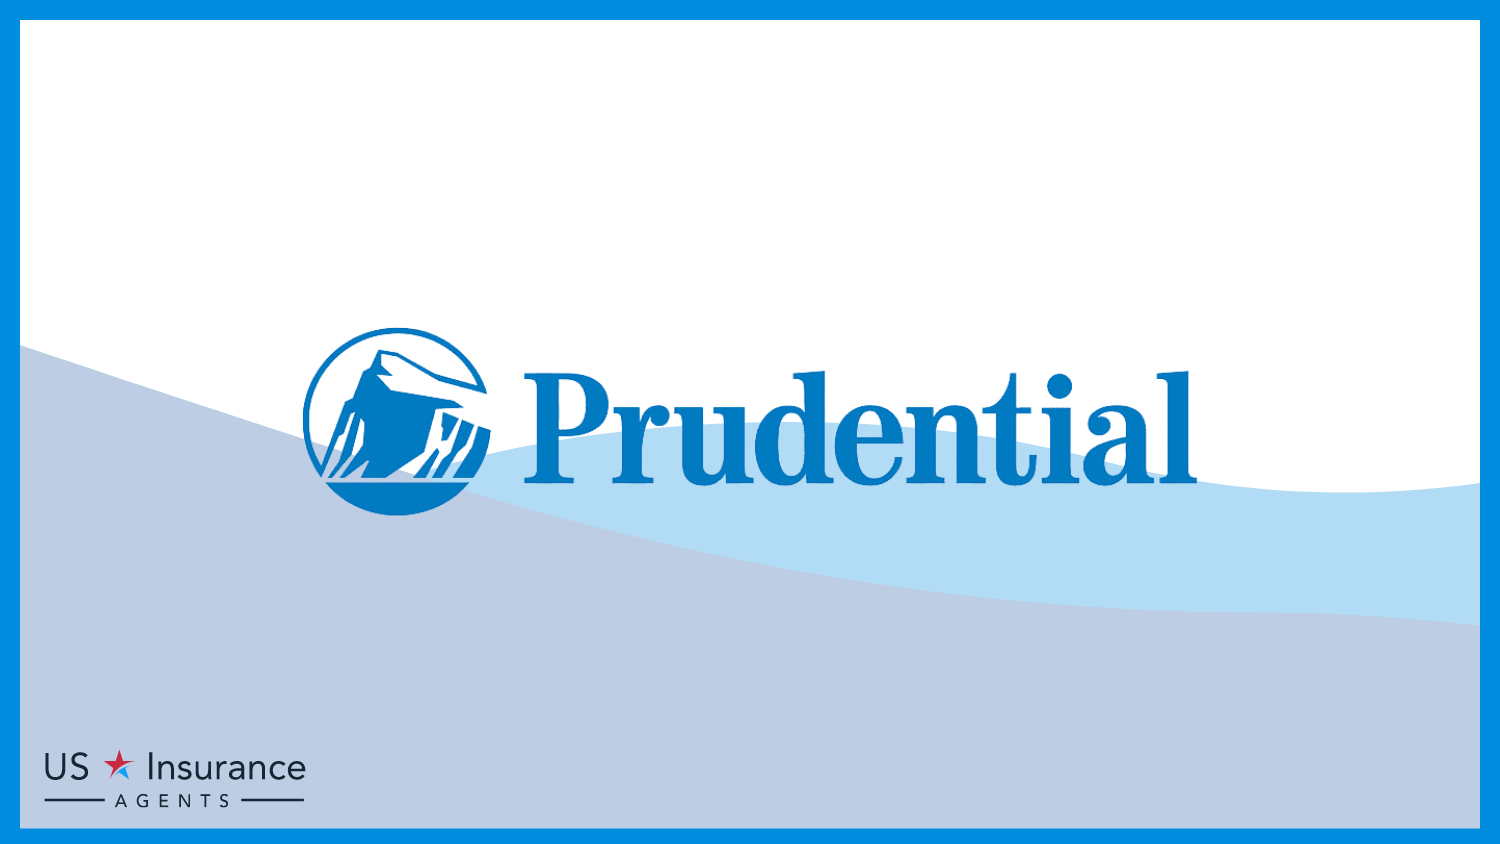 Prudential: Best Life Insurance for Cyclists